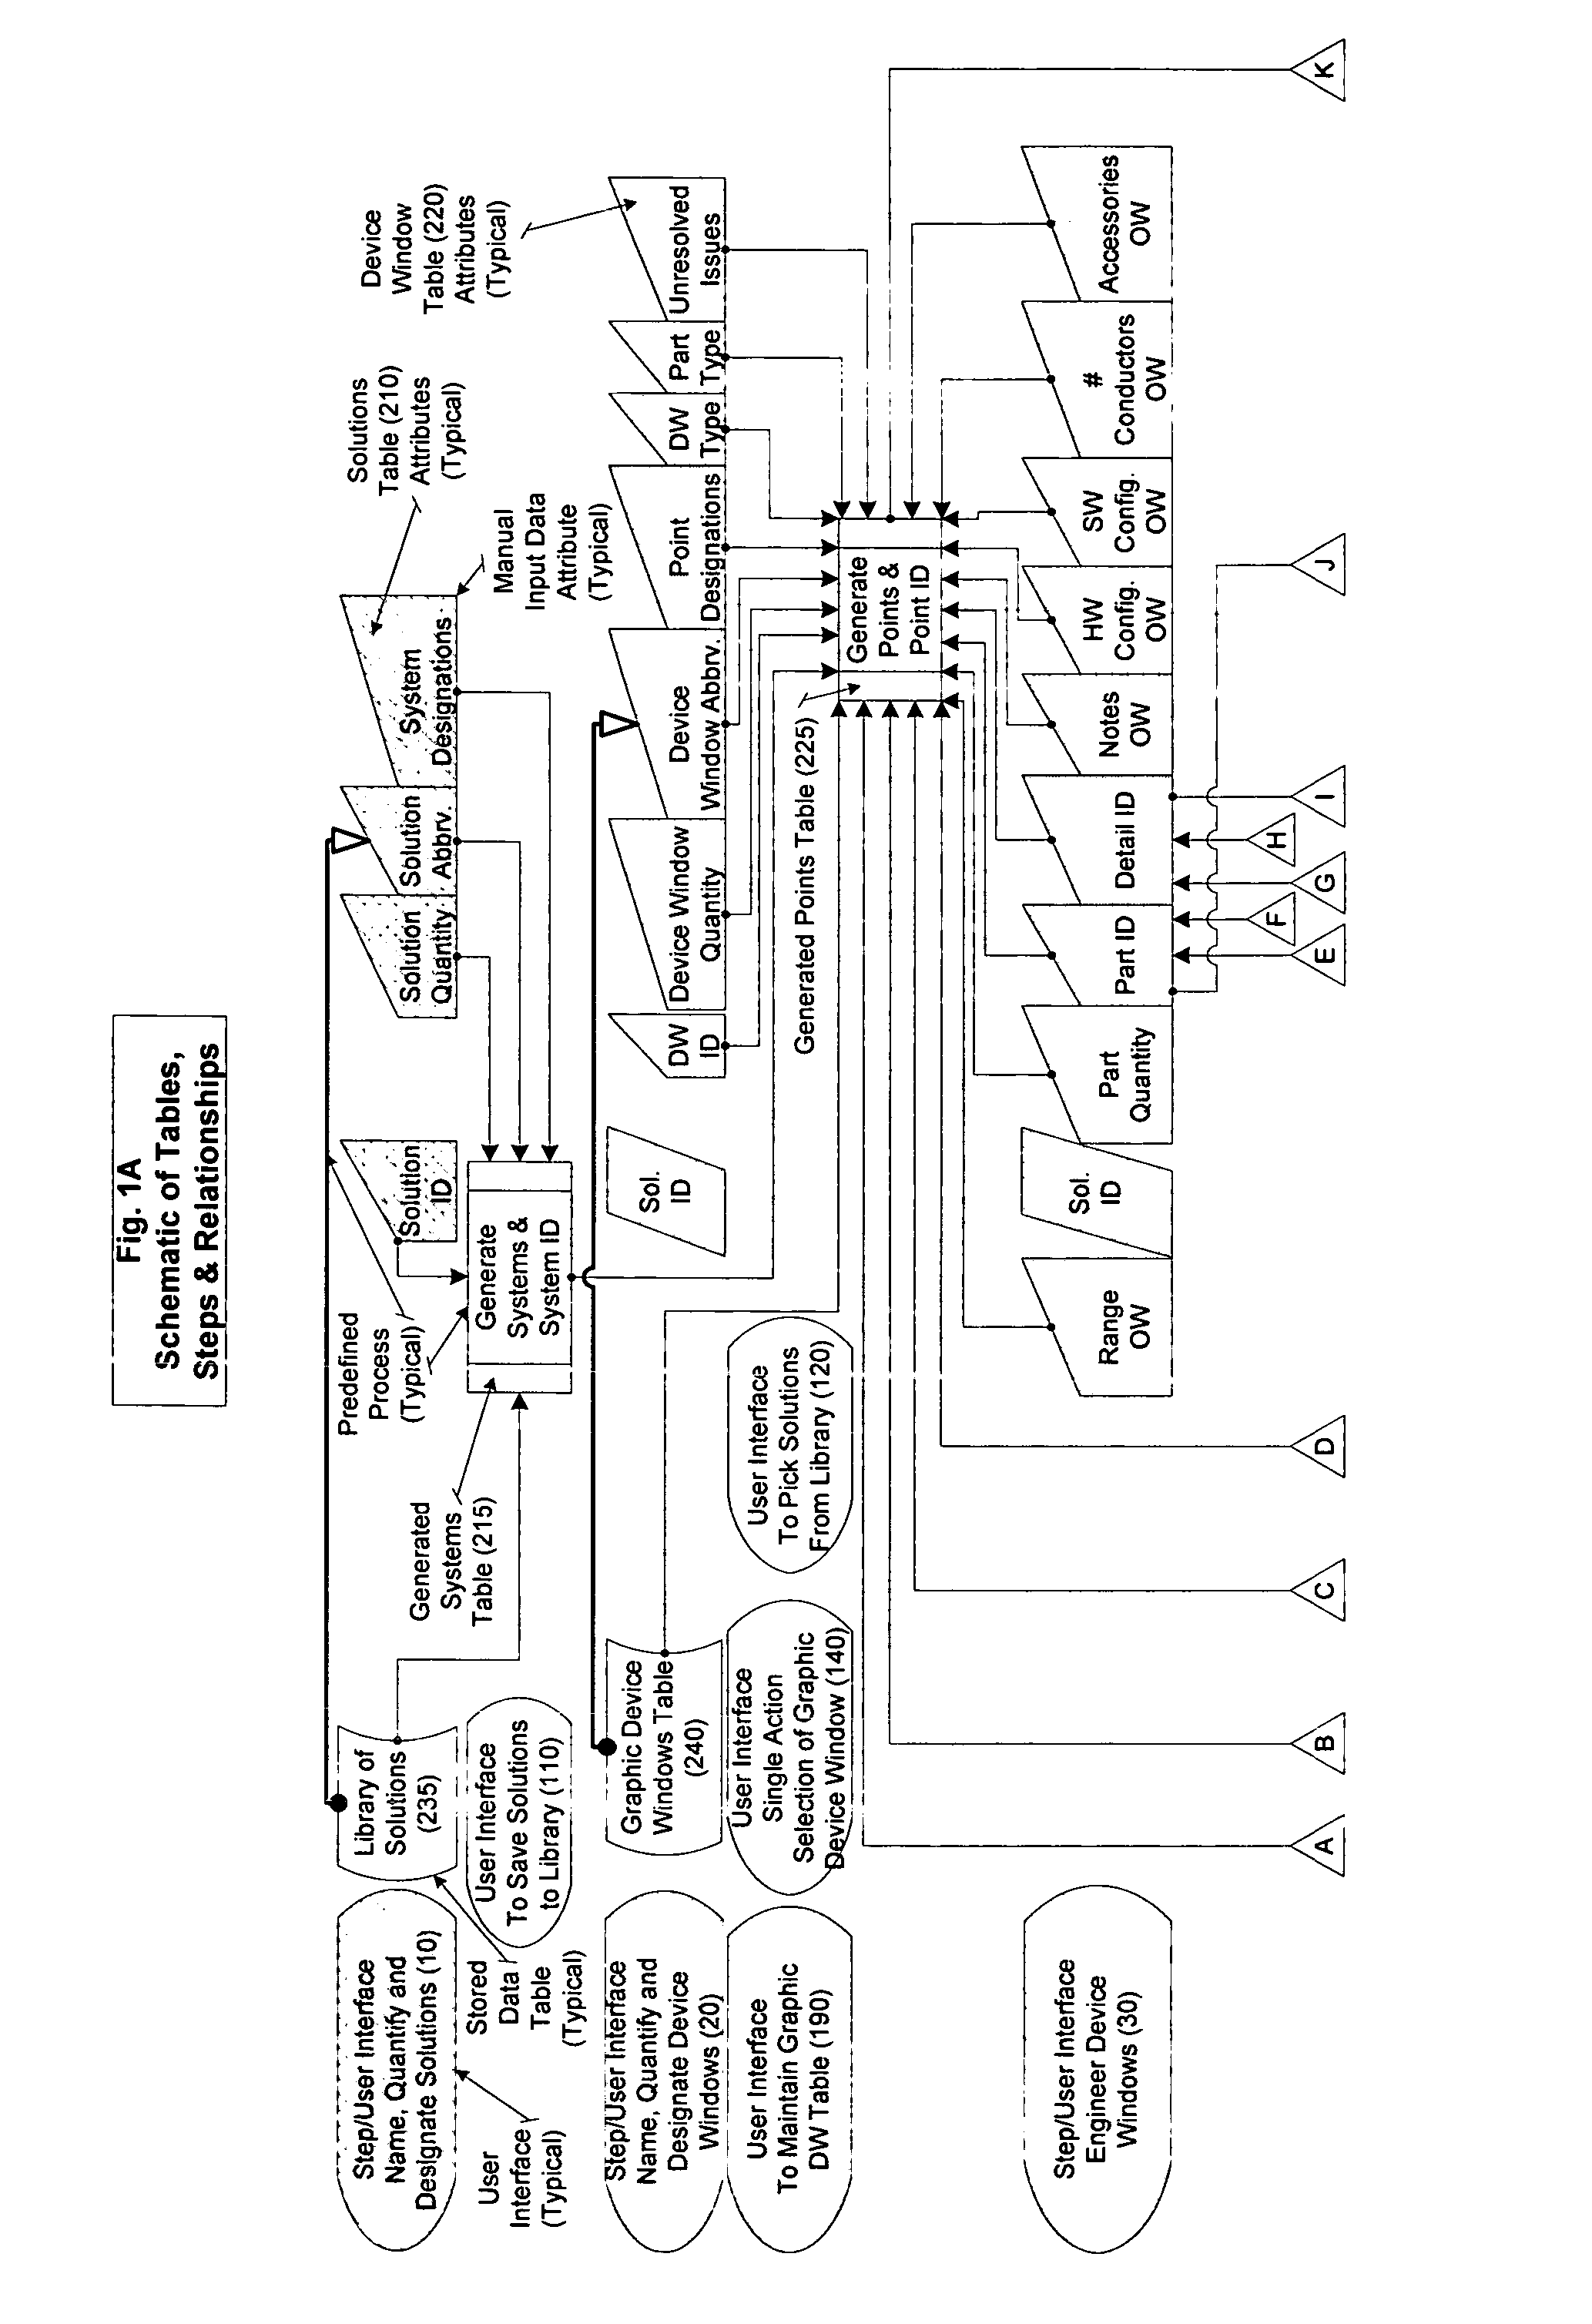 Method for engineering a control system